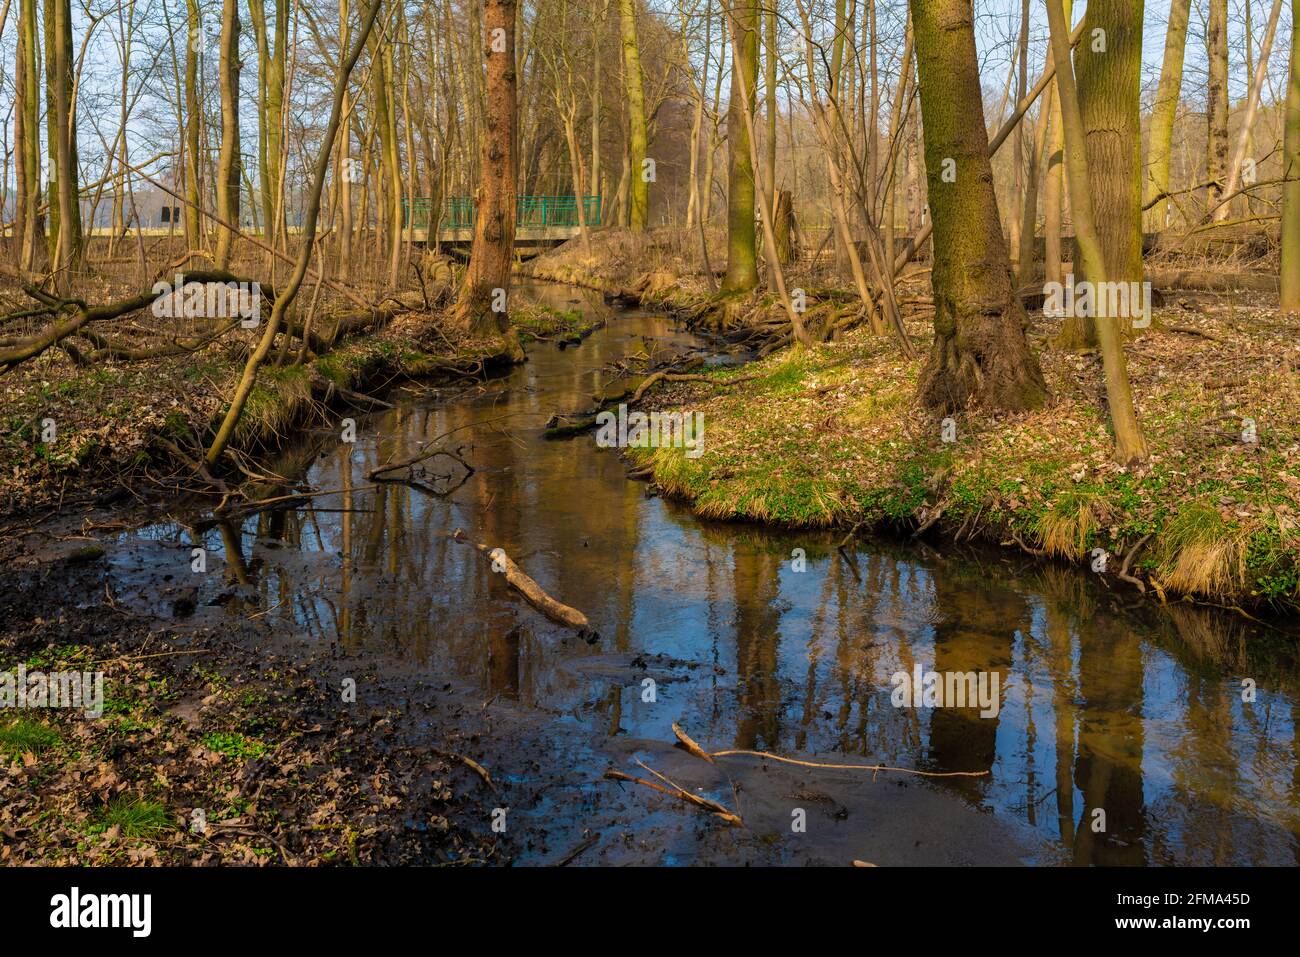 The small river Eiserbach in spring in Germany in the sunshine, old broken branches lie in the water Stock Photo